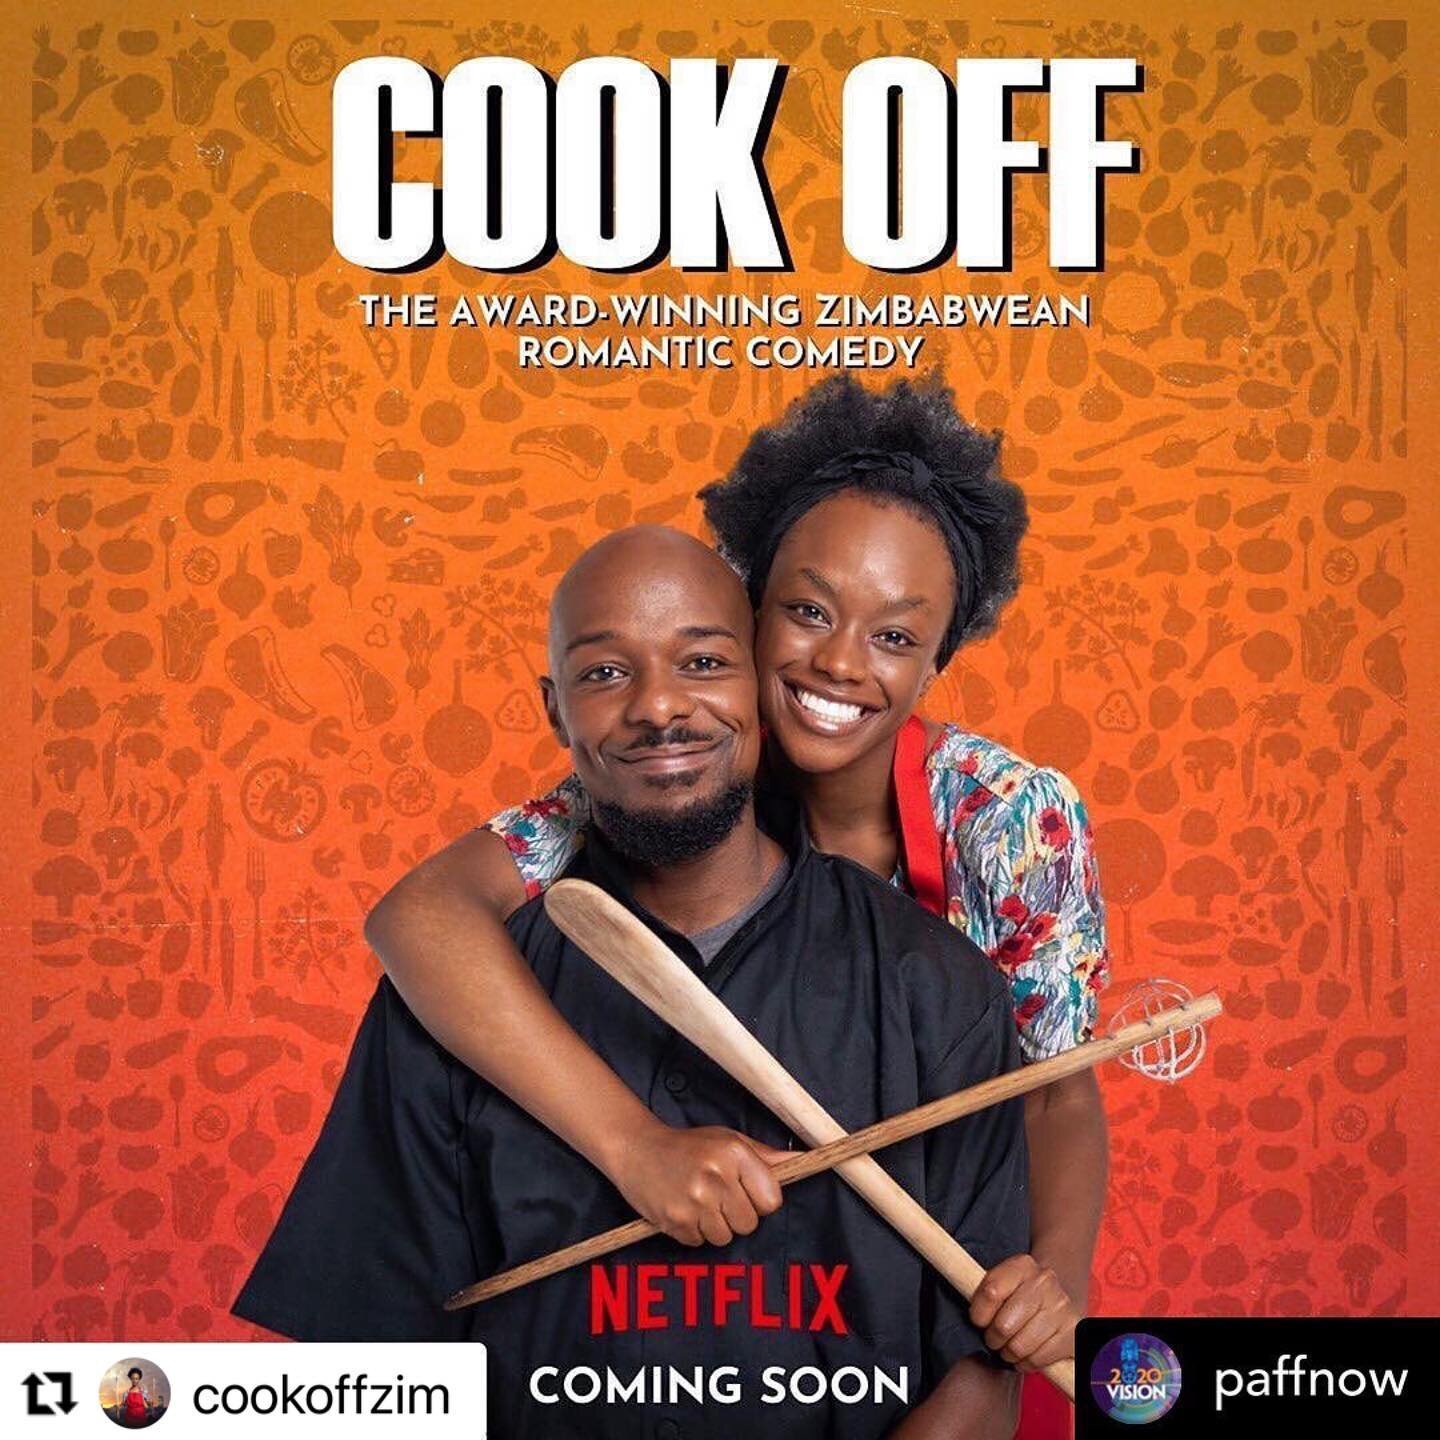 In our latest episode, we speak to @tendai_chitima star of the Netflix movie, Cook Off @cookoffzim! She spoke about her journey to starring in the first Zimbabwean production on Netflix and her insights on the future of arts and business in Africa. 
